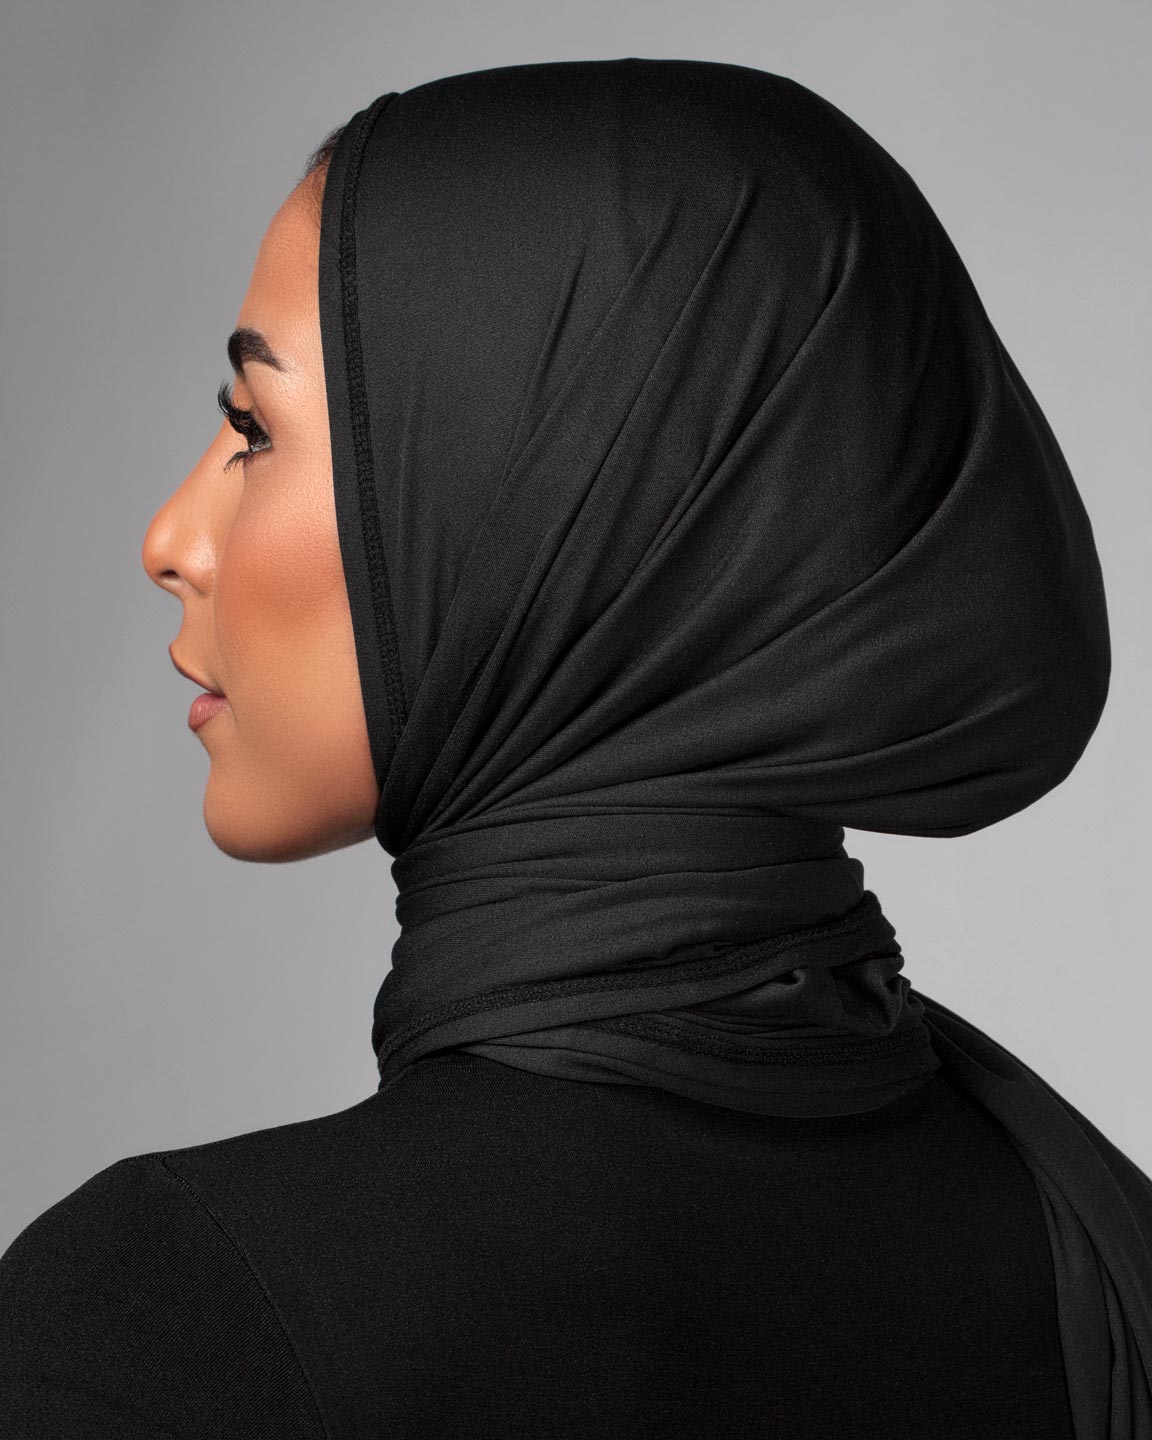 Cool Dry Shawl 2.0 in black by Veil Garments. Sports hijab collection.